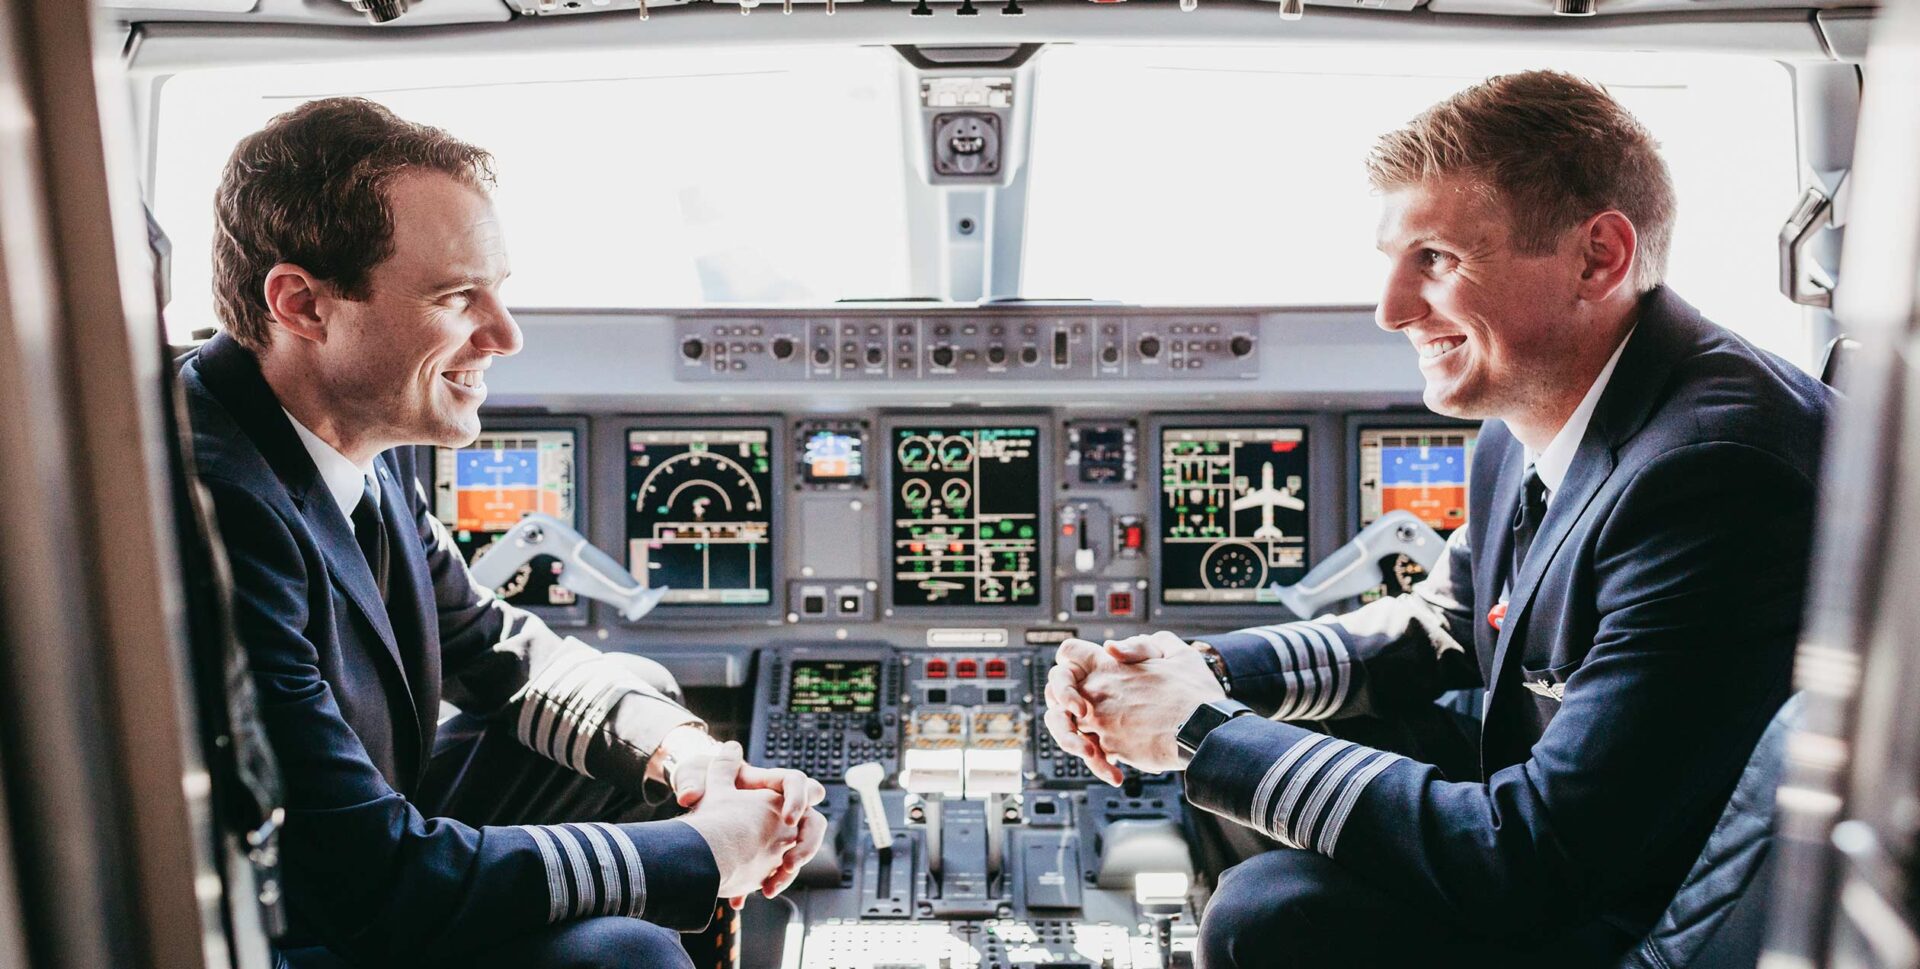 COMMERCIAL PILOT TRAINING IN THE USA Best Pilot Training Institute in